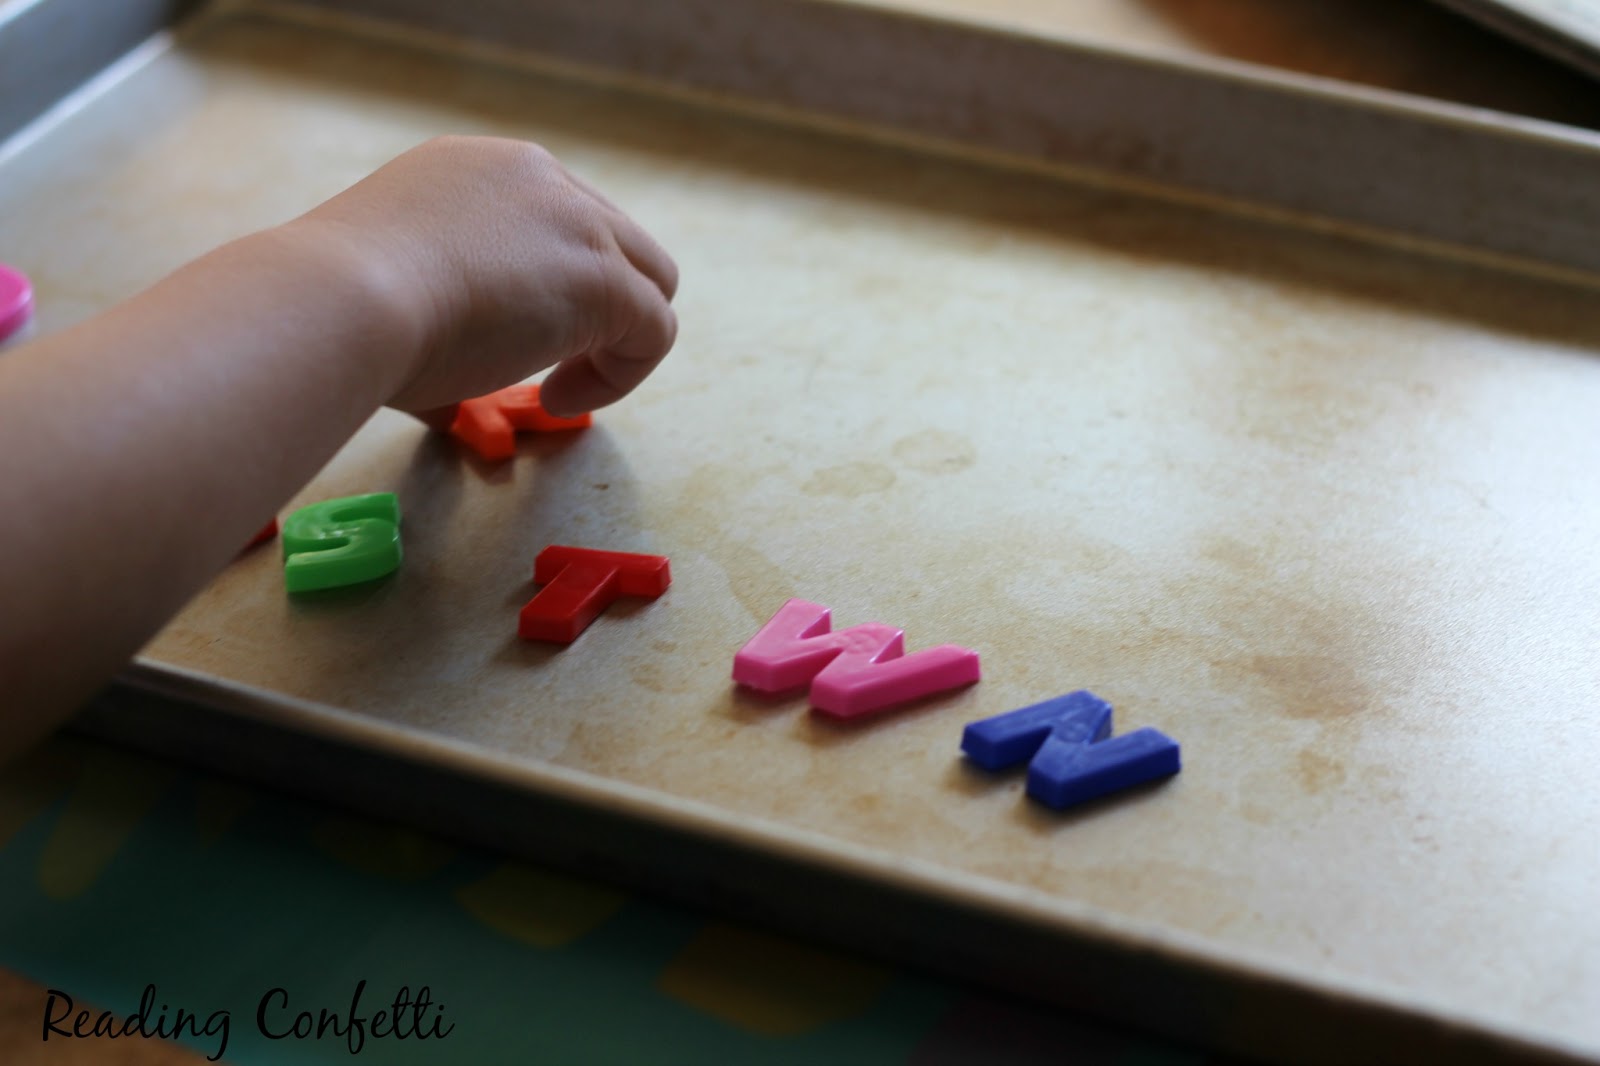 Magnetic alphabet games kids can play to practice letter recognition